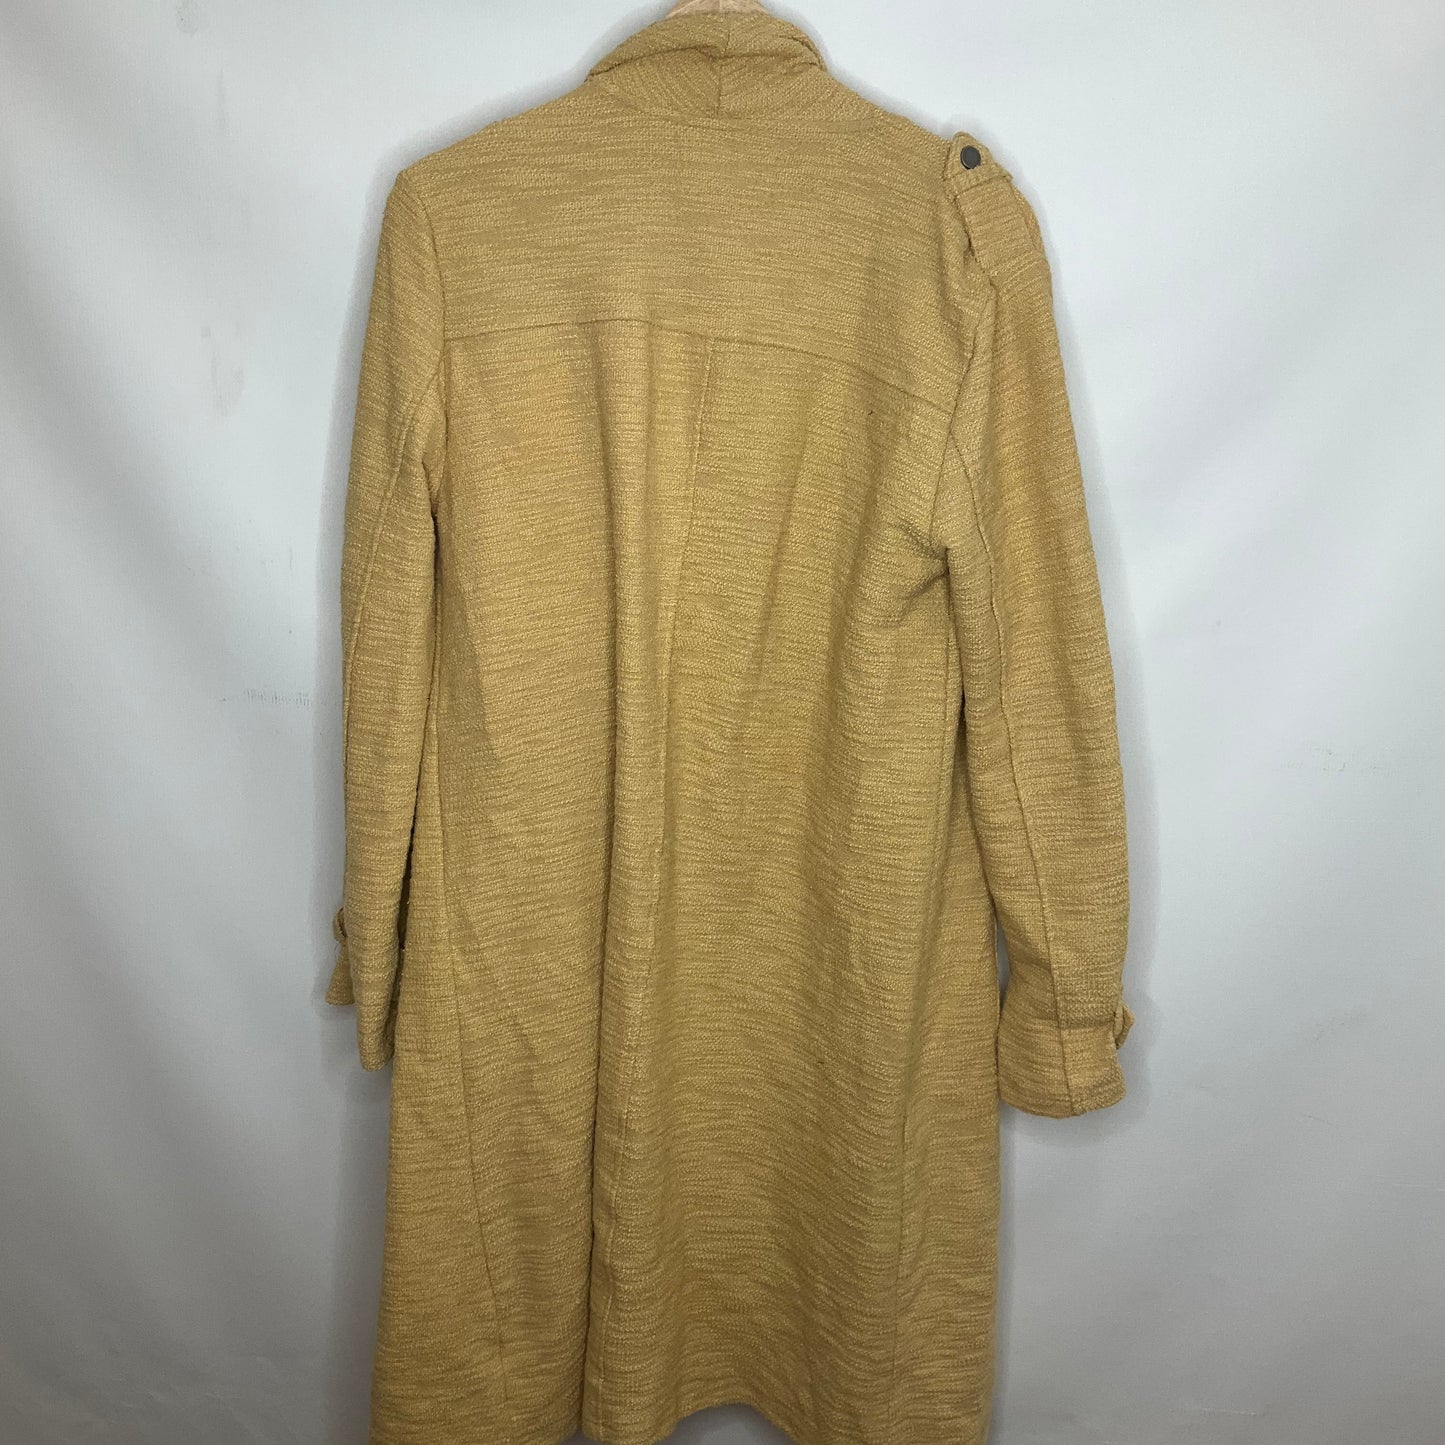 Yellow Jacket Other Steve Madden, Size M